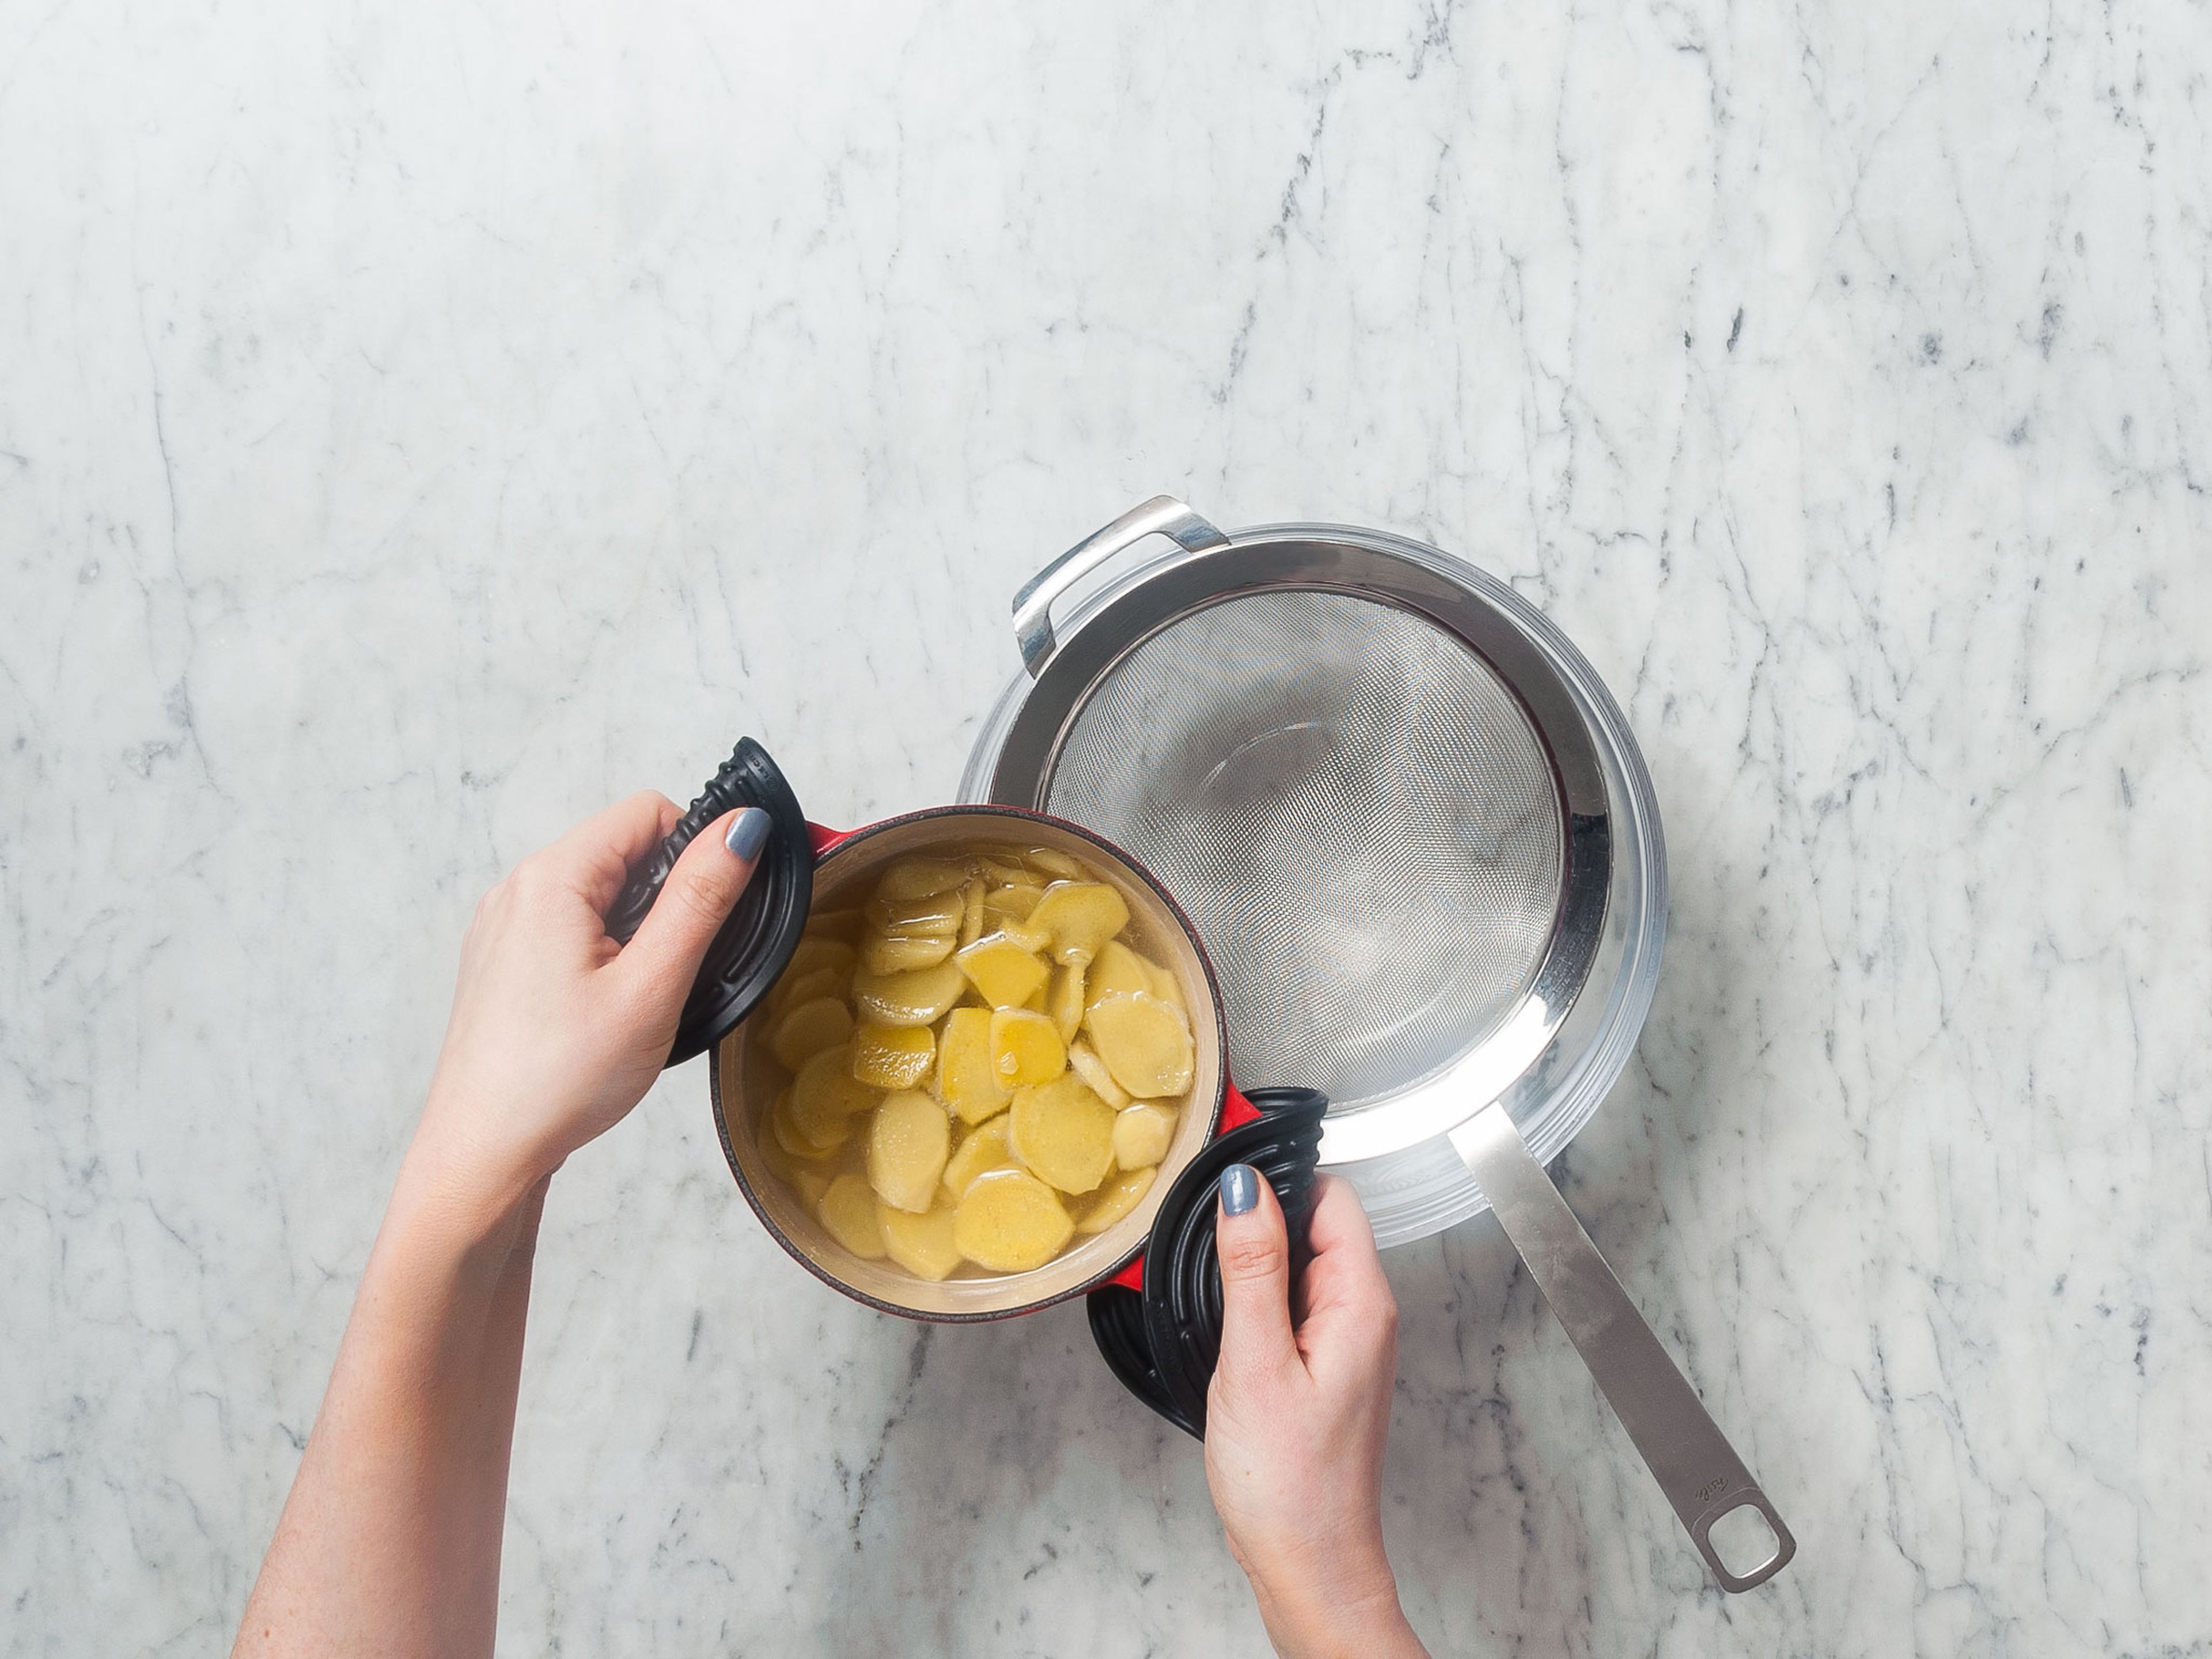 To make syrup, chop ginger and add to a small saucepan along with the water. Bring to a boil. Simmer for approx. 15 min., then add sugar and continue to simmer for approx. 5 min. Pass through a sieve into a mixing bowl to filter out ginger pieces, then let cool.